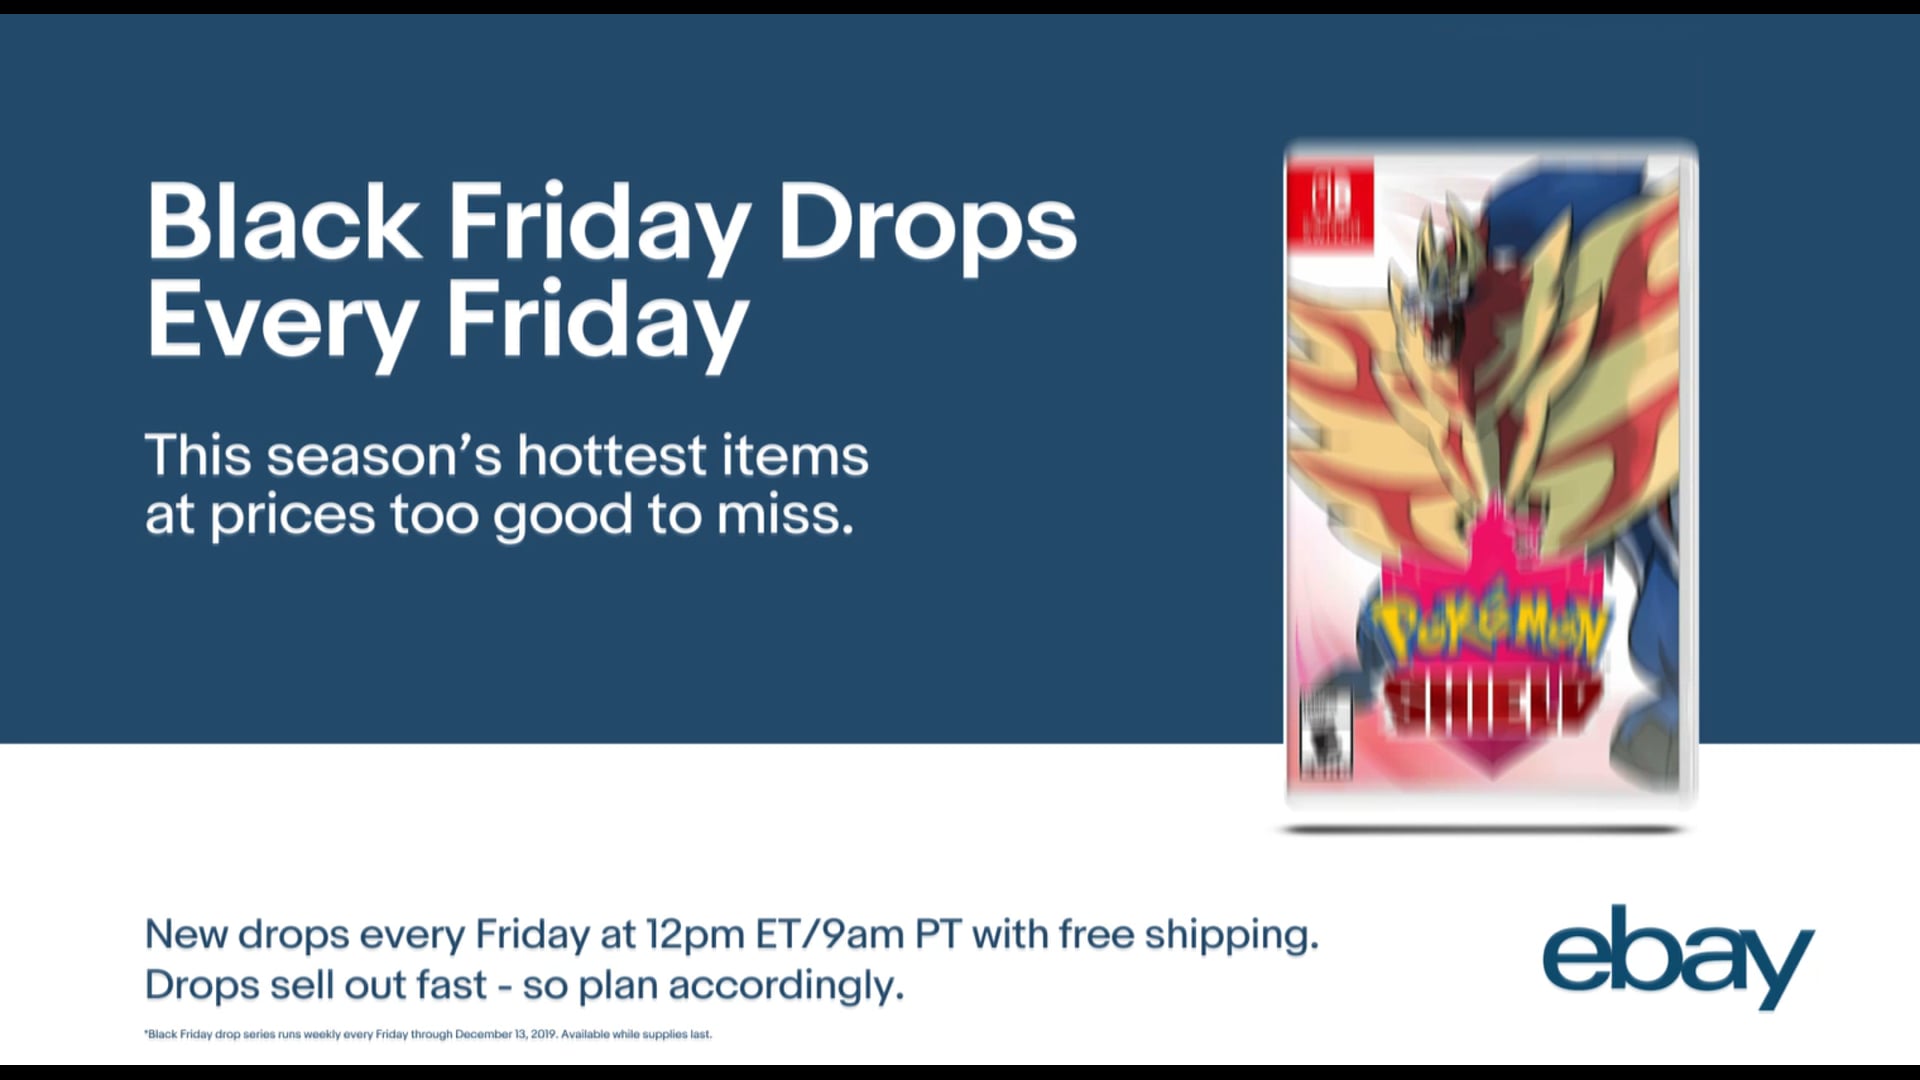 eBay Launches Early Black Friday “Drops” and Unveils Holiday Brand Outlet